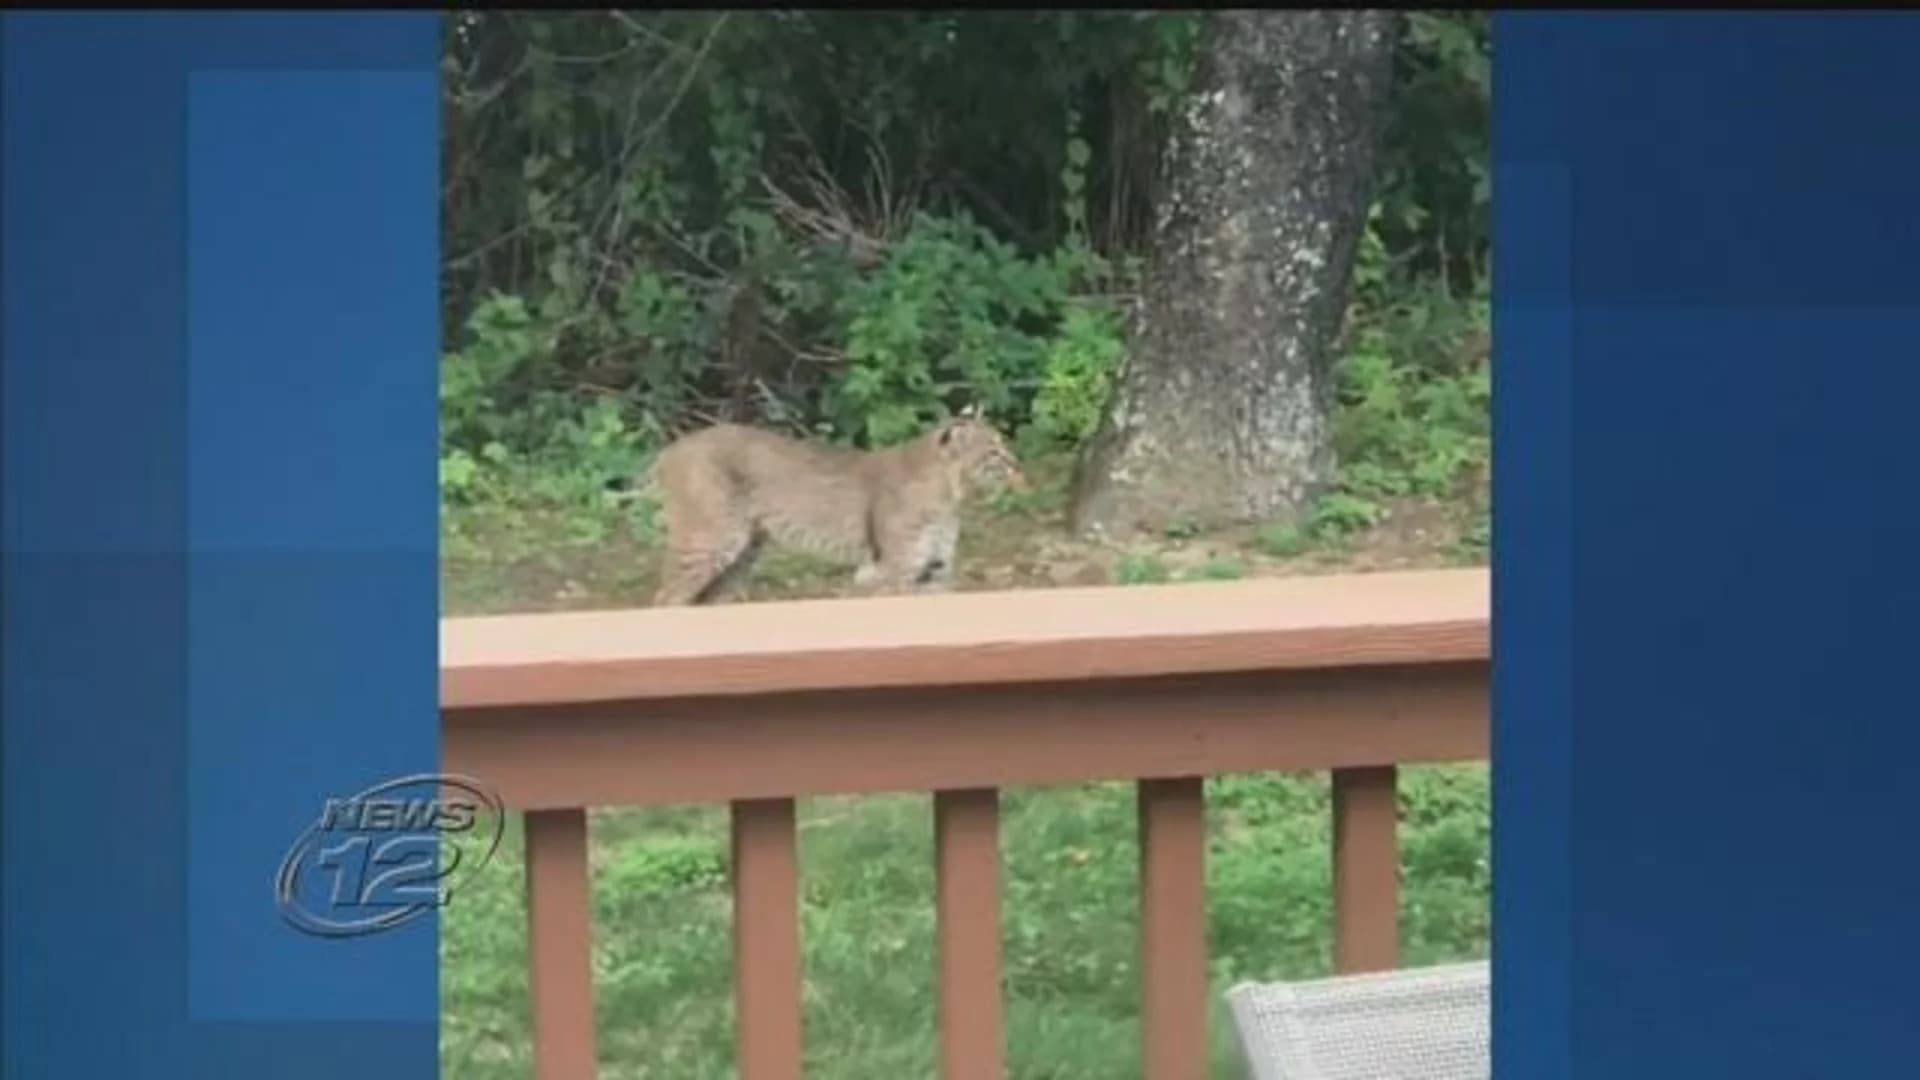 News 12's Most-Viewed: #3 - Officials issue bobcat warning in Orange County